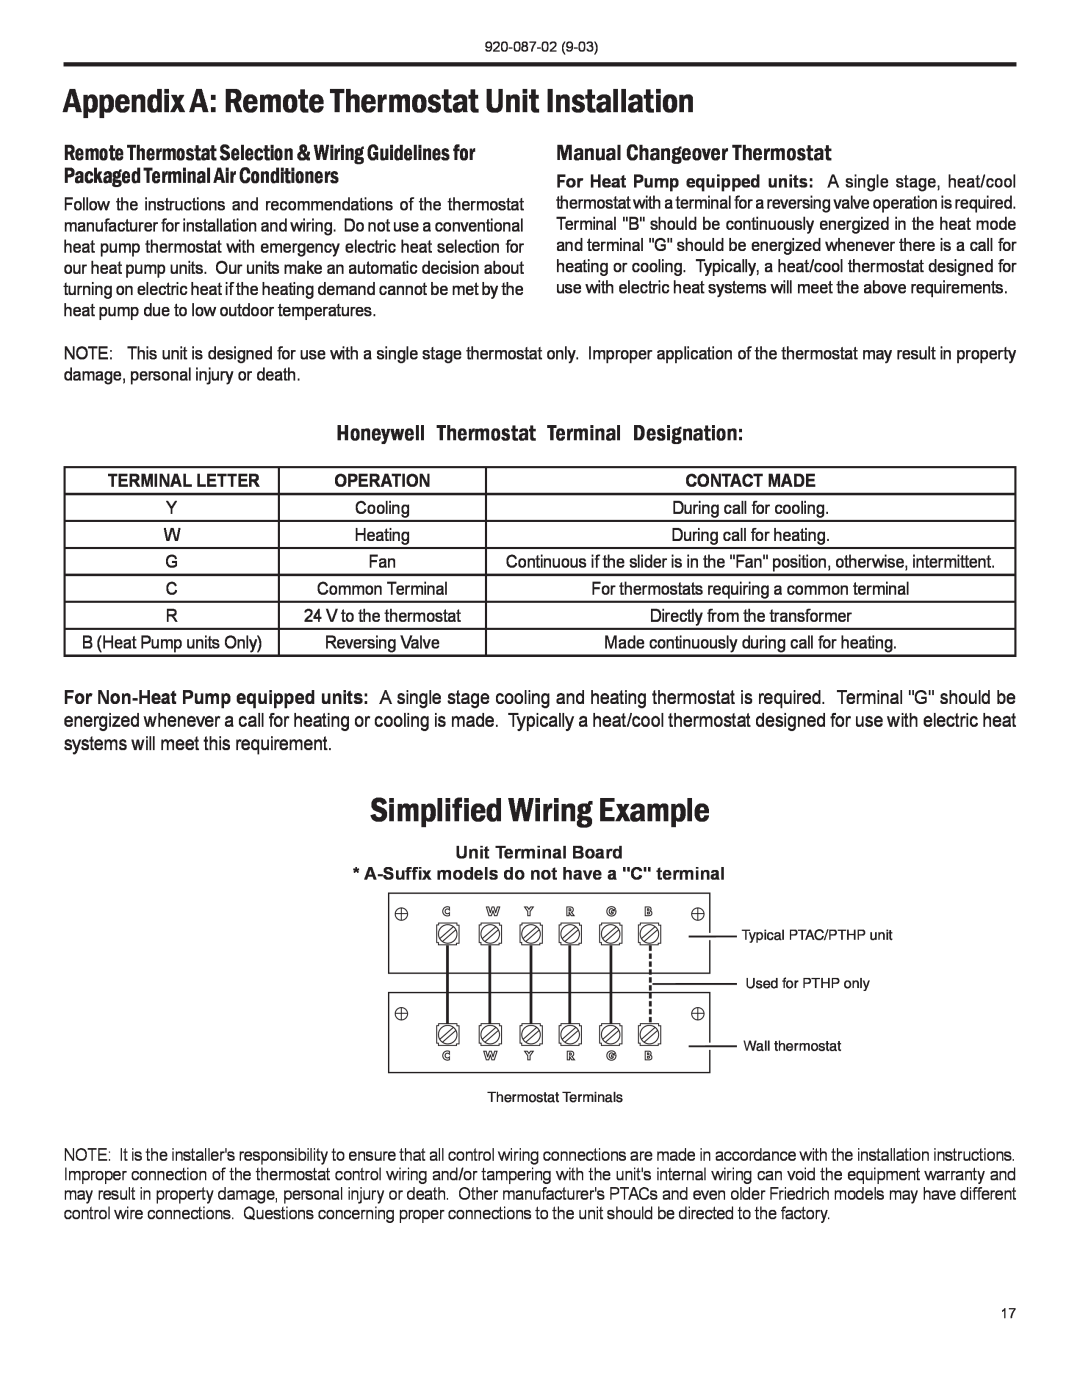 Friedrich PTAC Appendix A Remote Thermostat Unit Installation, Simplified Wiring Example, Manual Changeover Thermostat 